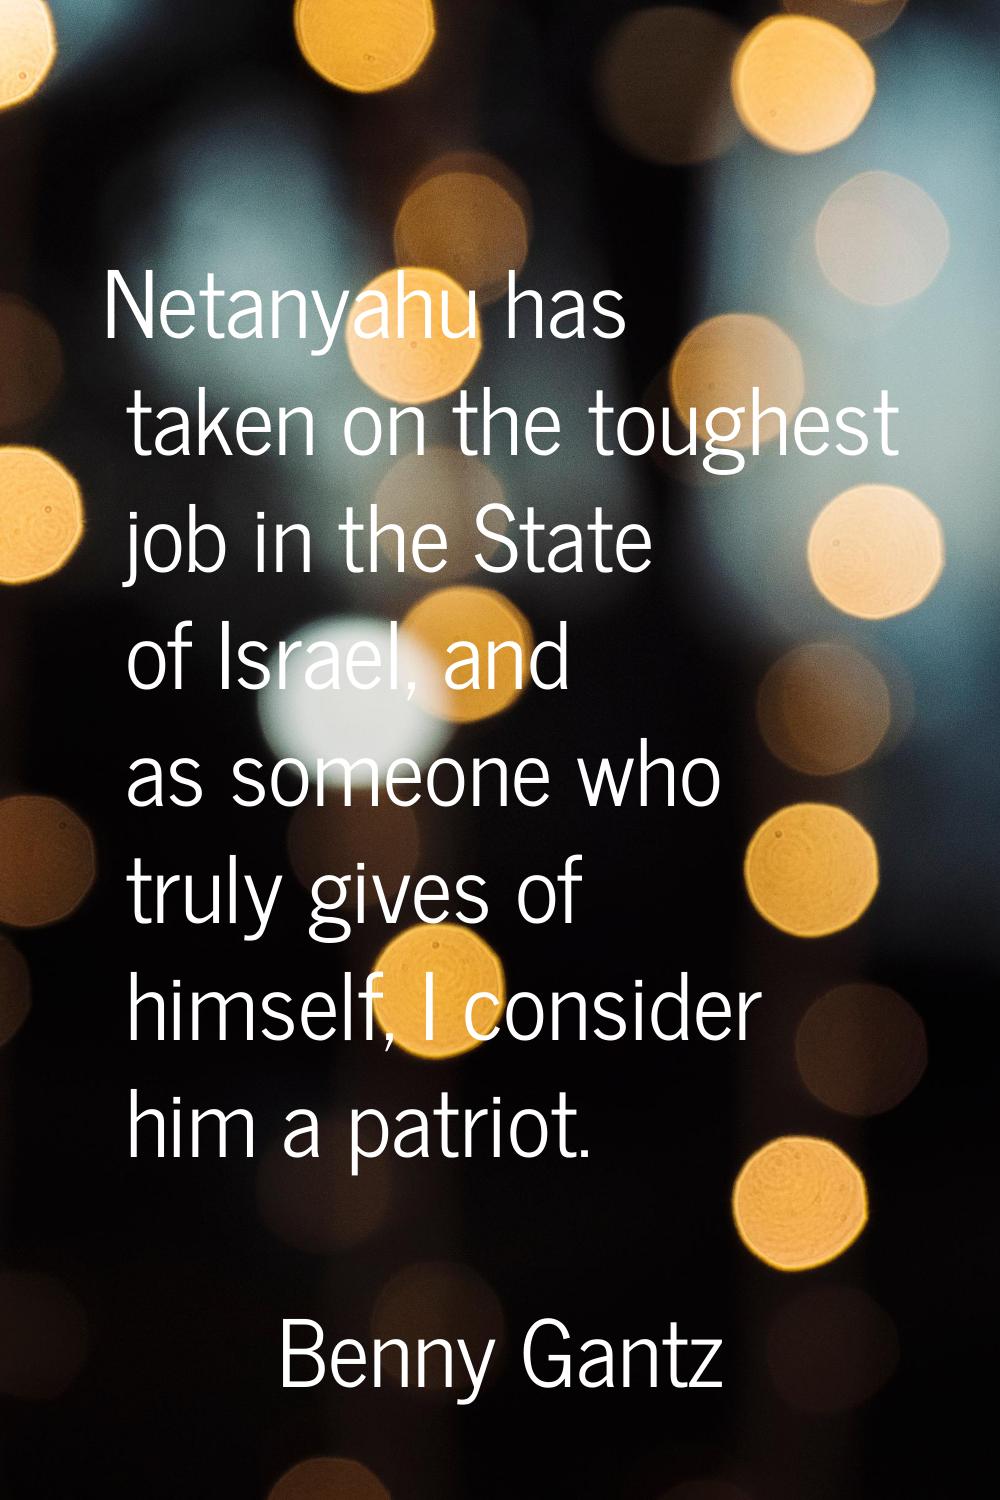 Netanyahu has taken on the toughest job in the State of Israel, and as someone who truly gives of h